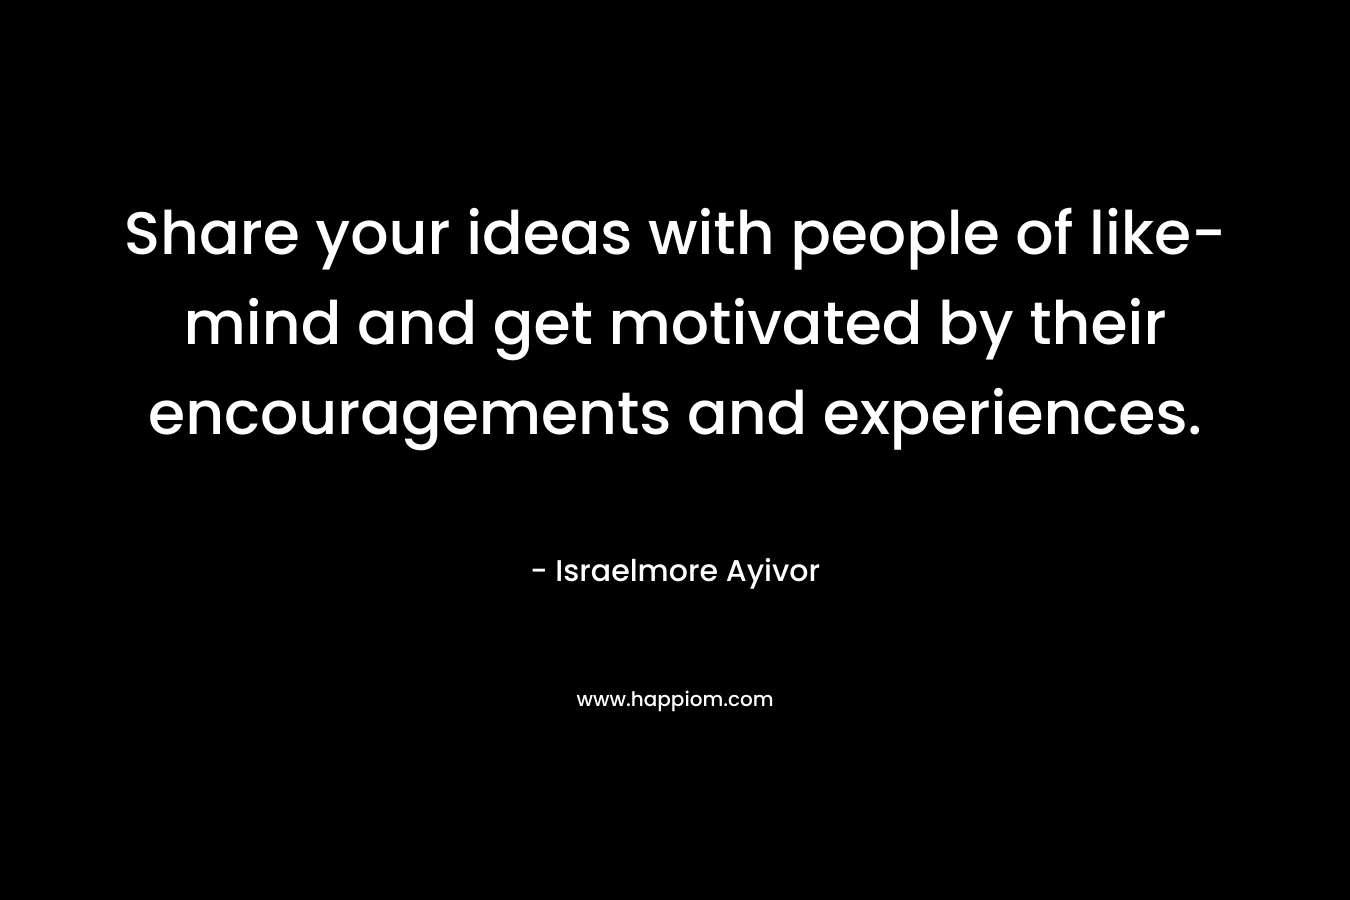 Share your ideas with people of like-mind and get motivated by their encouragements and experiences. – Israelmore Ayivor